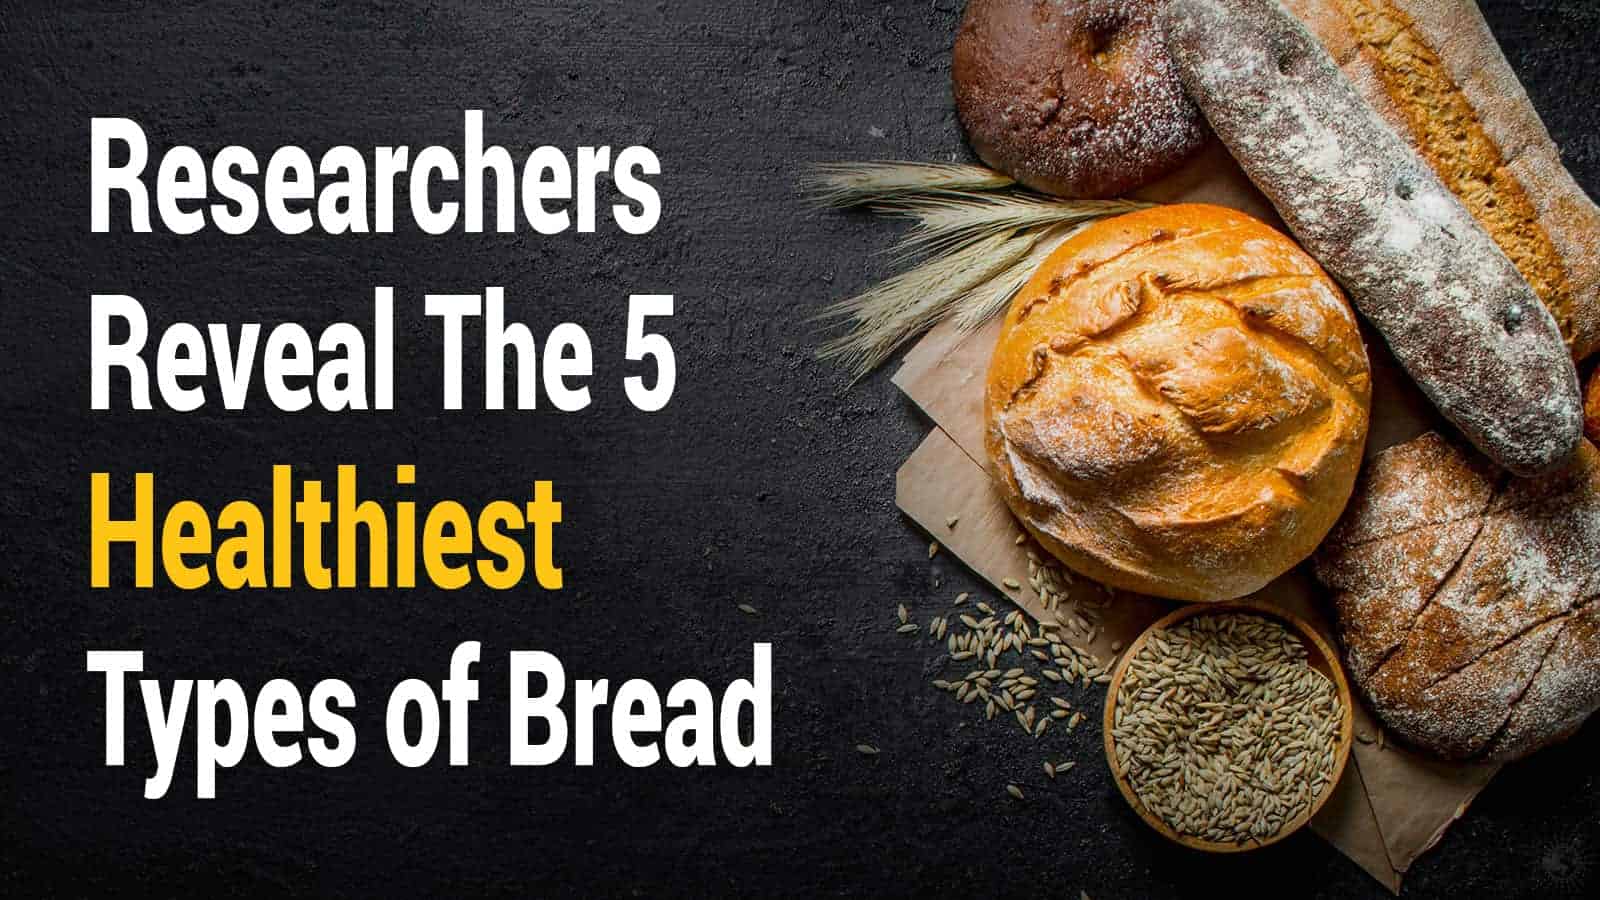 Researchers Reveal The 5 Healthiest Types of Bread